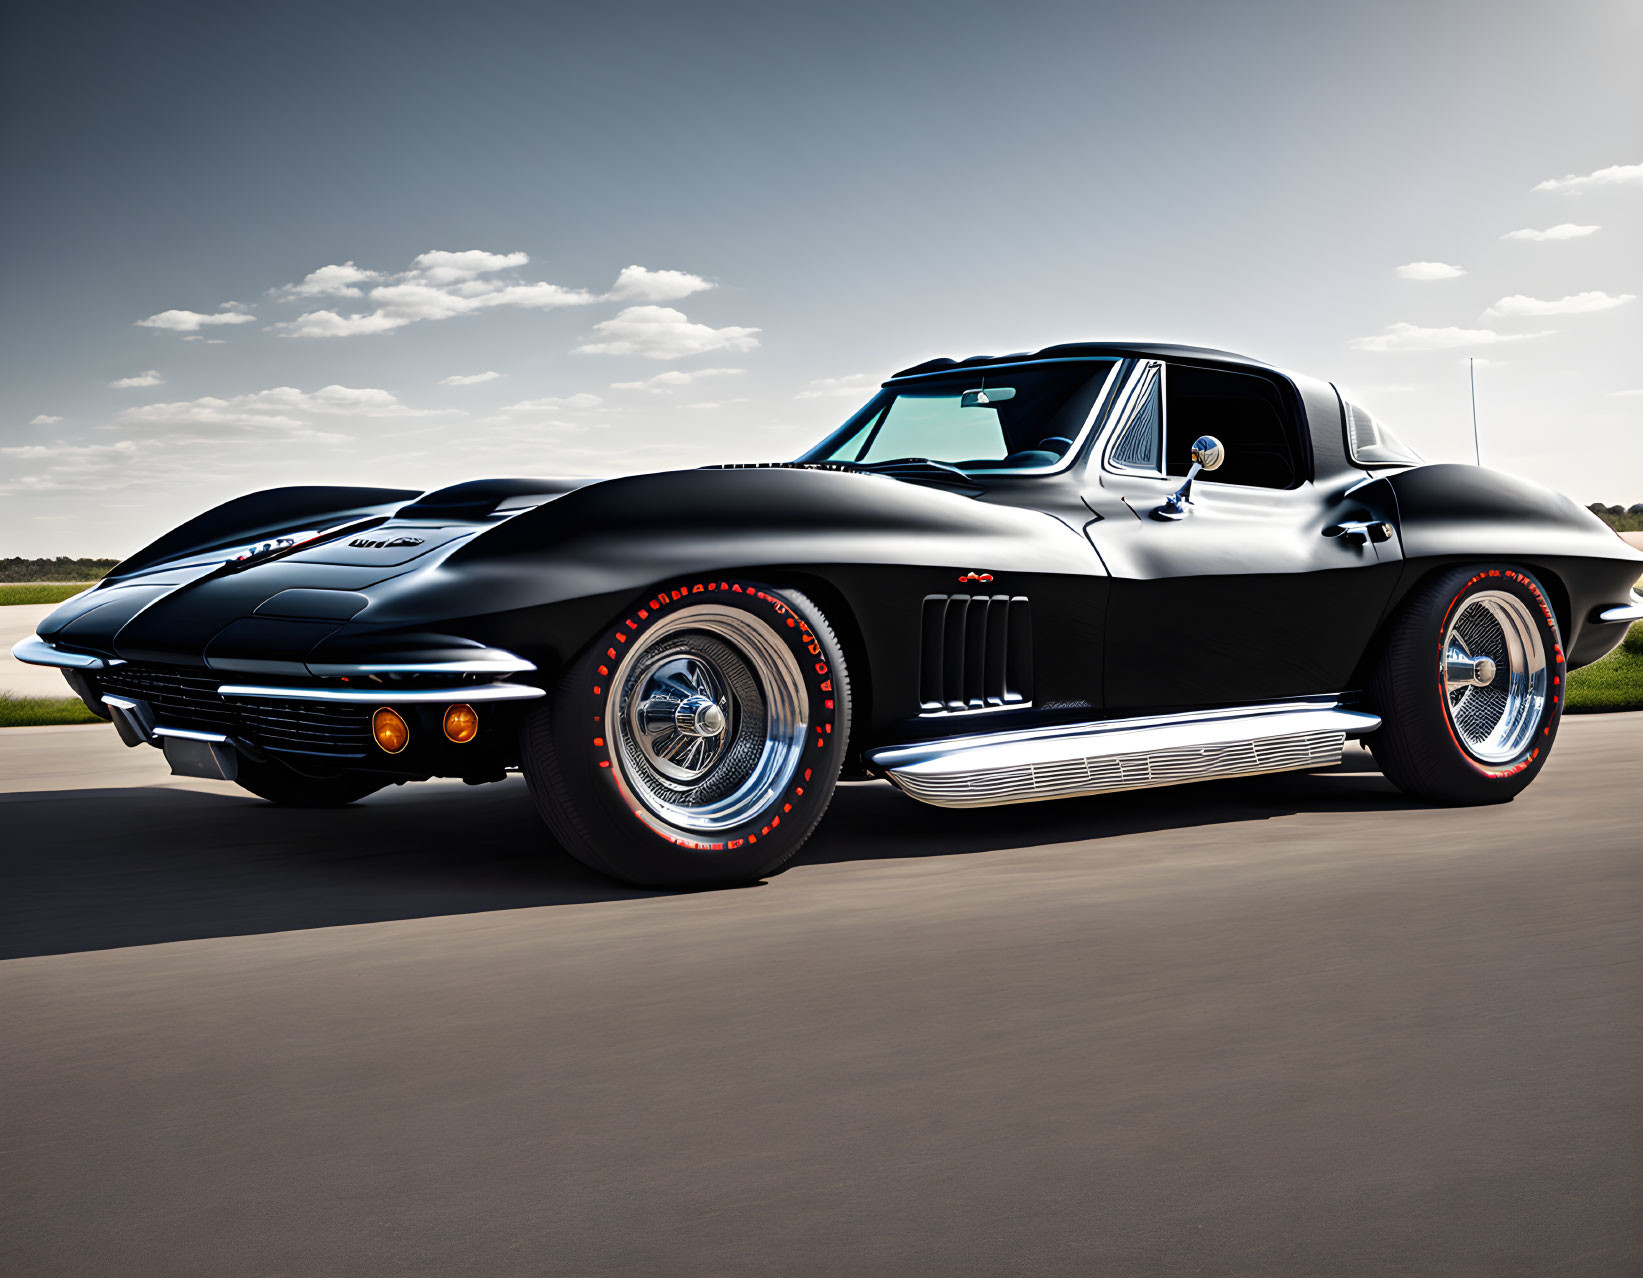 Vintage Black Chevrolet Corvette Stingray on Road with Clear Skies